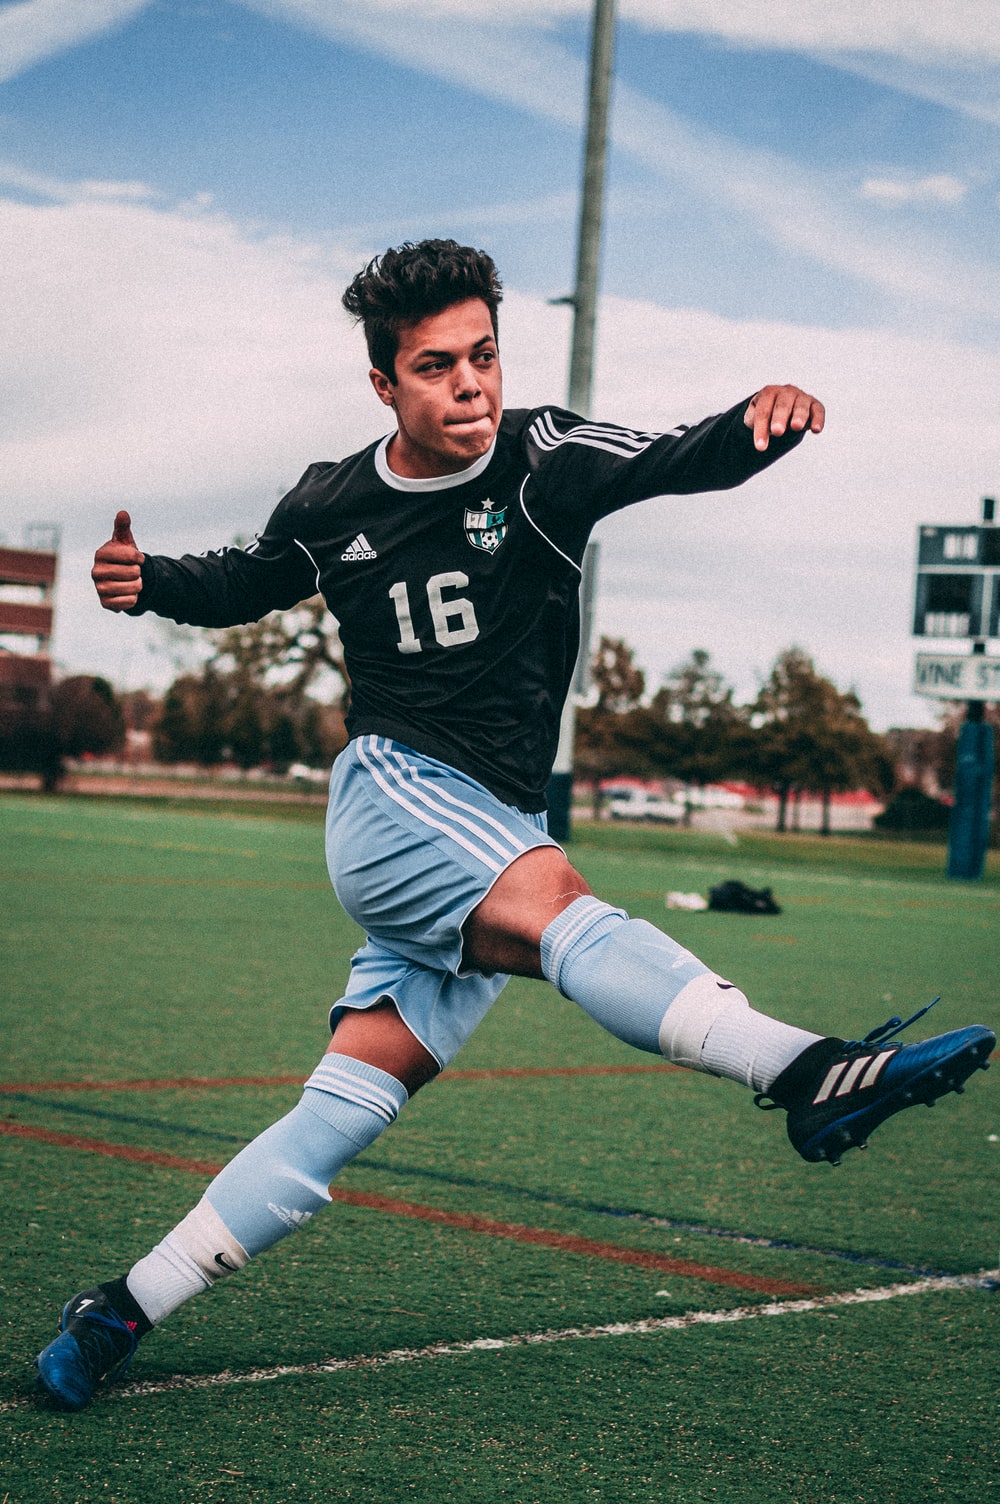 20 Soccer Outfits for Men - What to Wear to a Soccer Game?